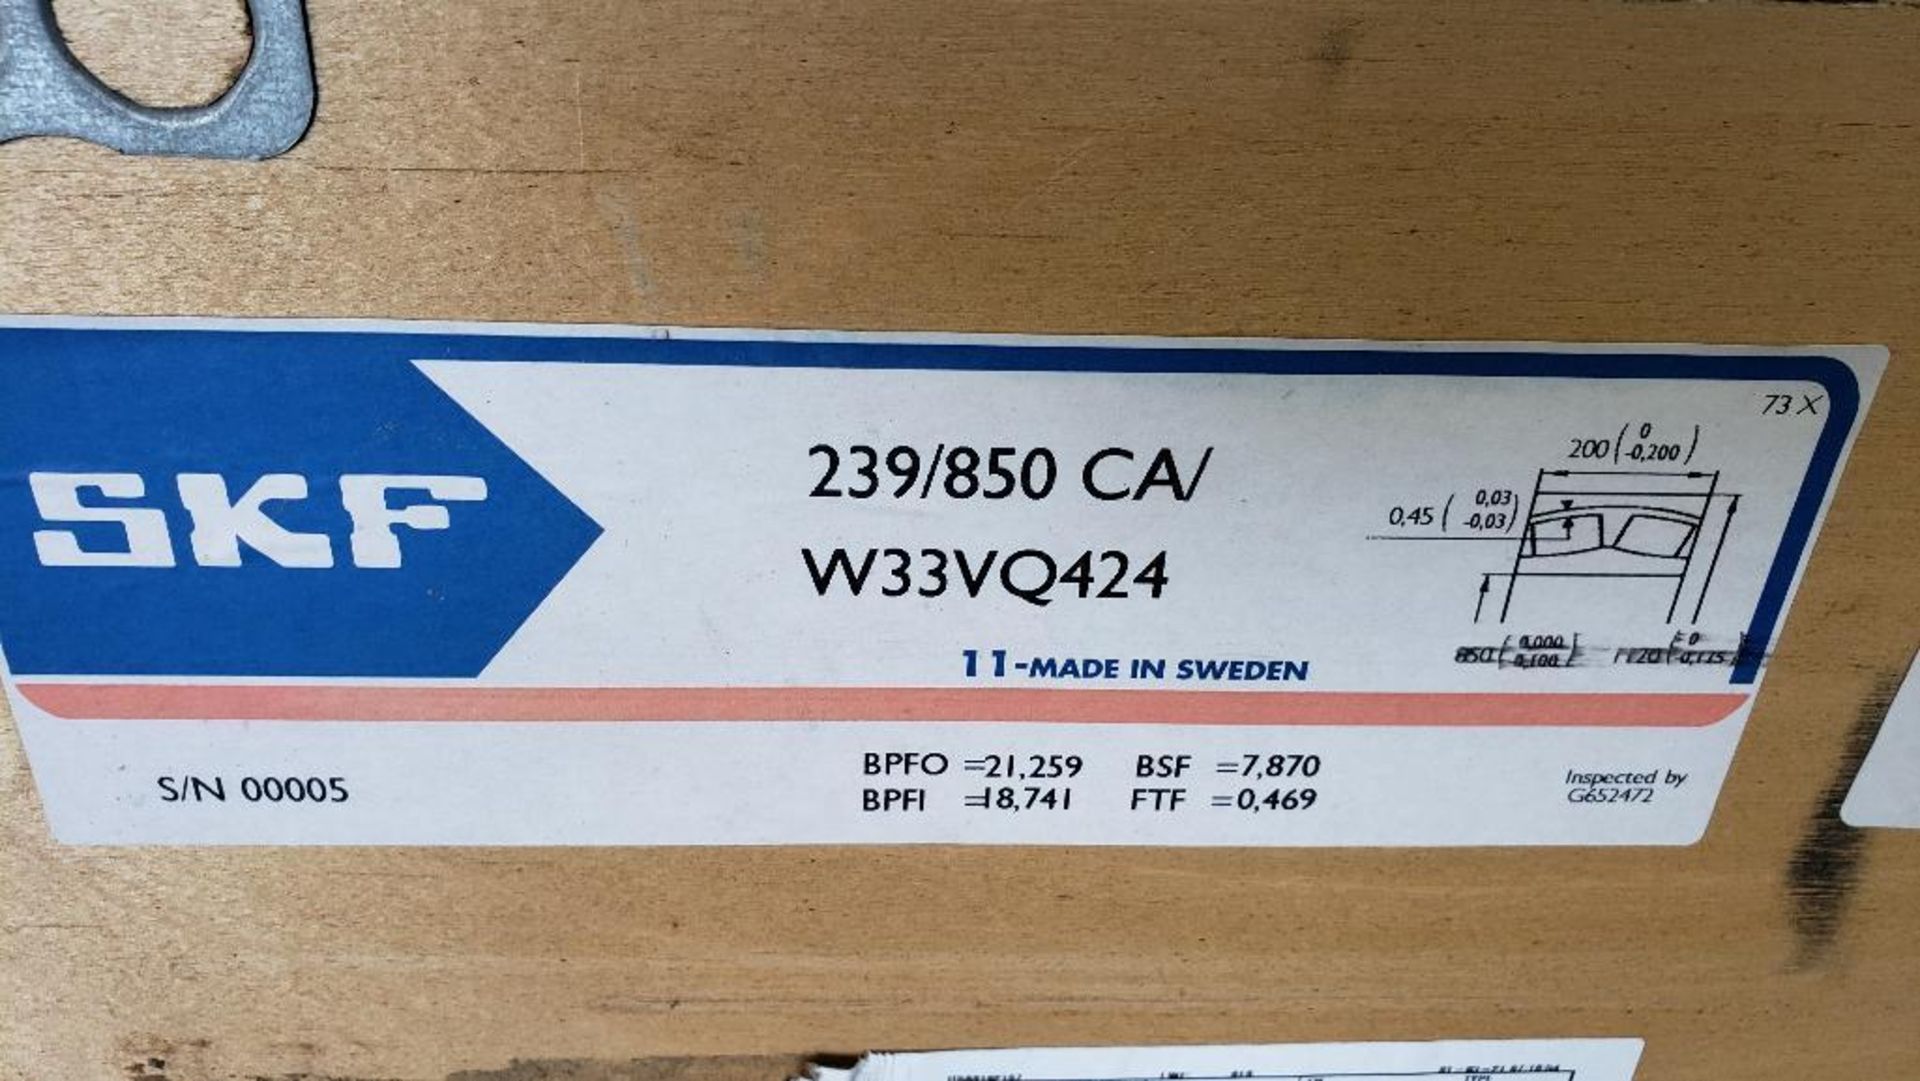 SKF super precision large capacity bearing. Part number 239/850 CA/W33VQ424. . New in crate. . - Image 2 of 6